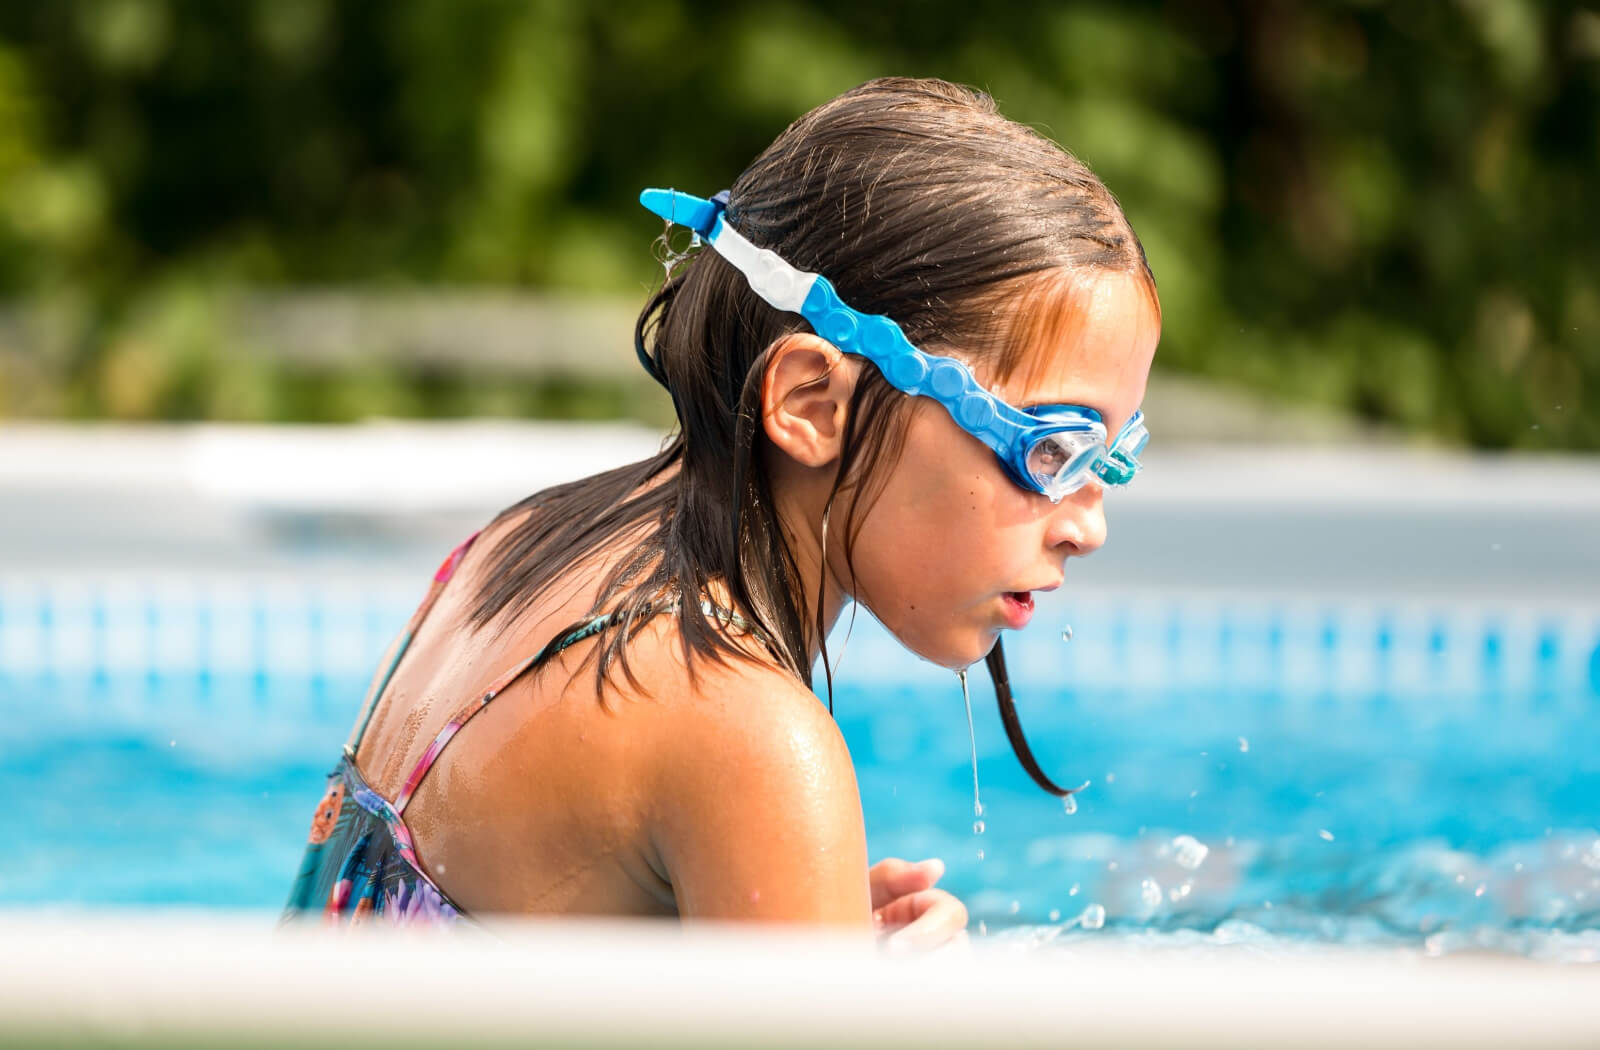 A young girl is wearing swimming goggles while having fun in an outdoor pool.